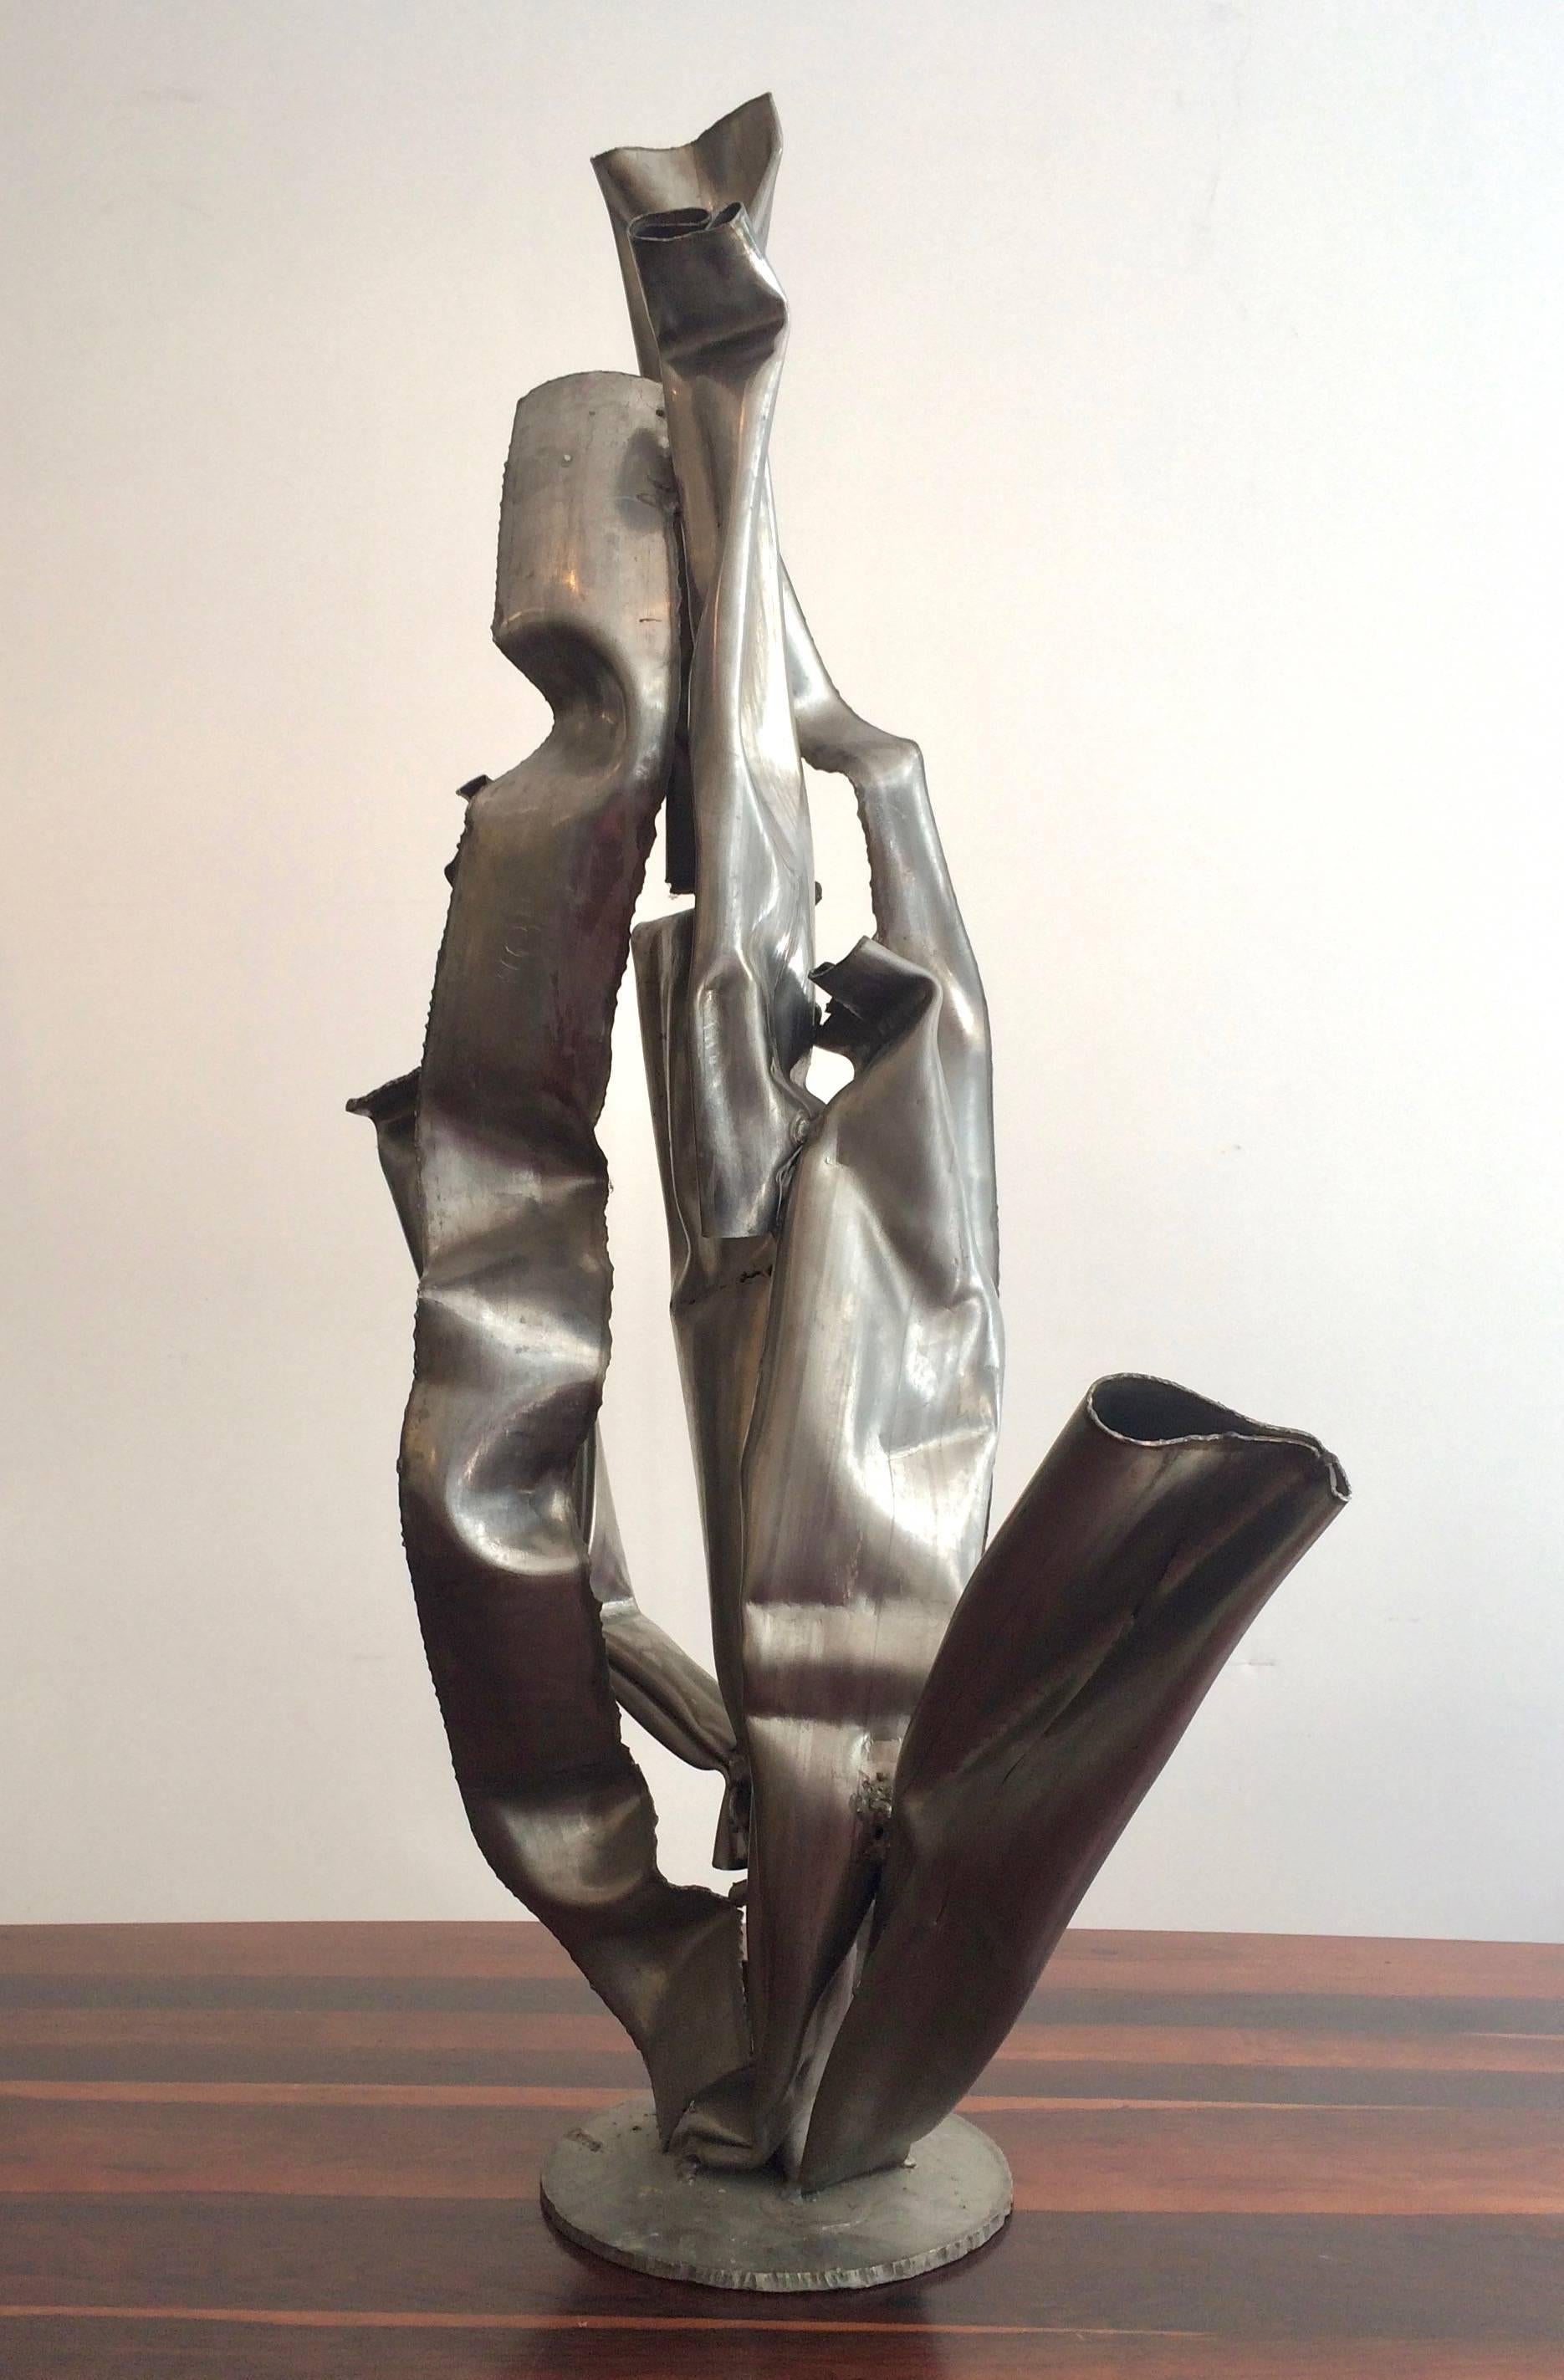 Albert Feraud (1921-2008)

Sculpture, welded steel. 
Signed and dated 1979 on the base. 

Measures: H 114 cm

Albert Feraud studied in Ecole de Beaux-Arts of Montpellier, Marseille and Paris, winning the prestigious Prix de Rome for his work